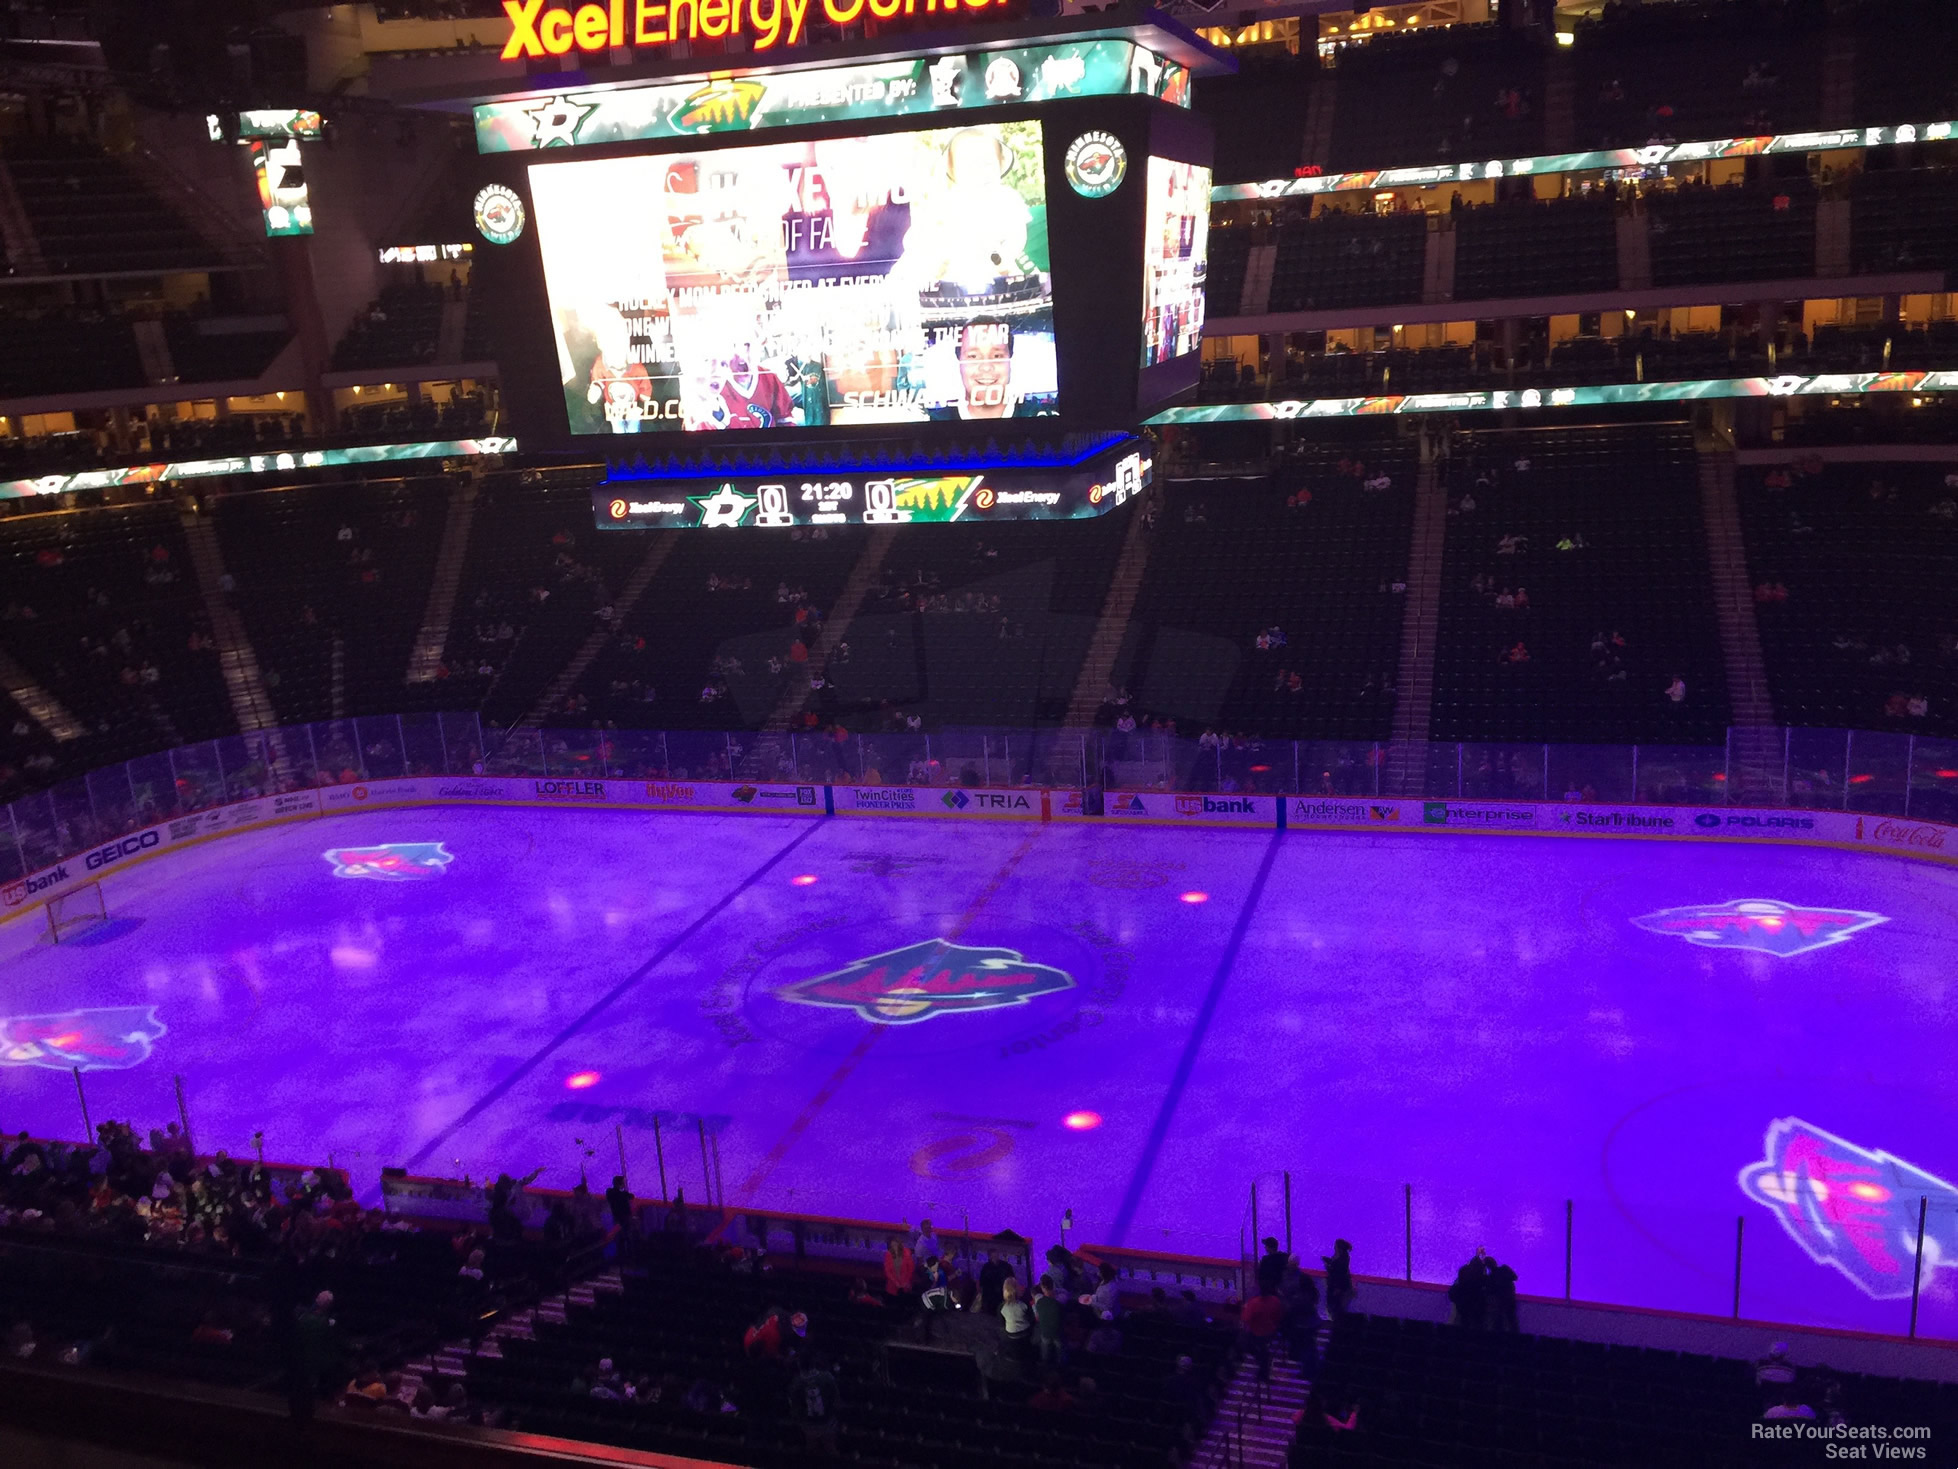 section c24, row 5 seat view  for hockey - xcel energy center